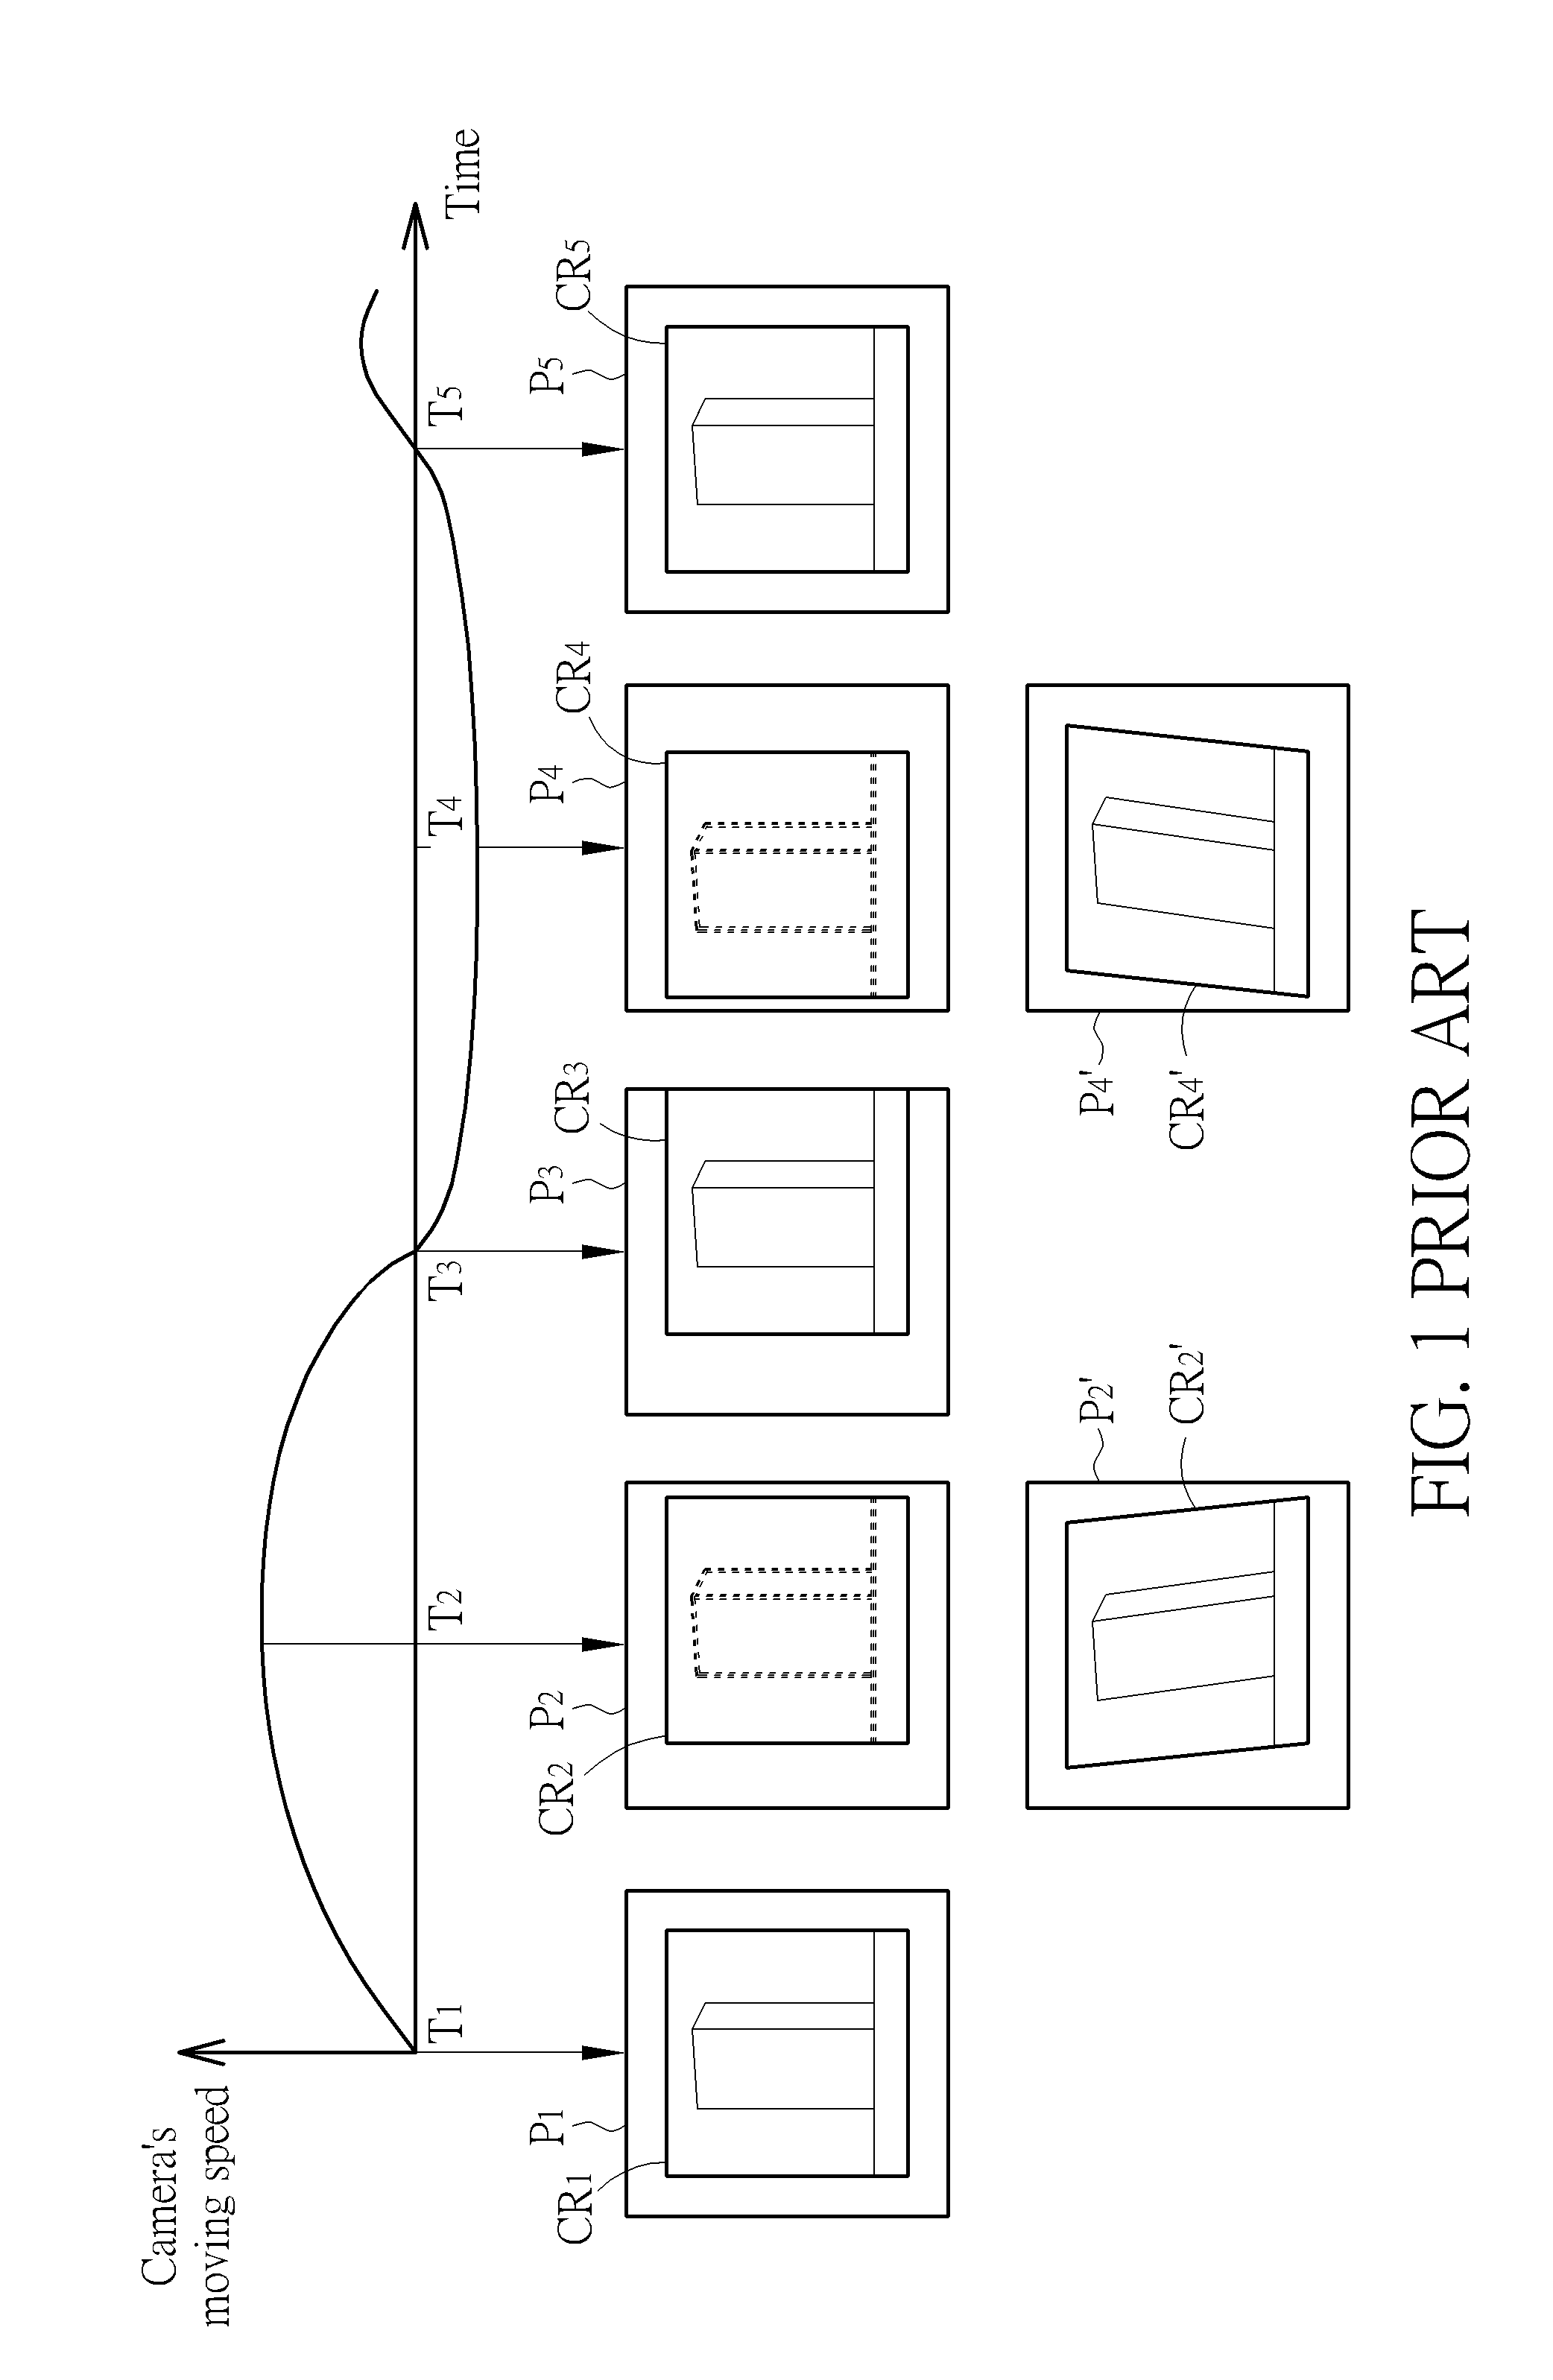 Image Blurring Avoiding Method and Image Processing Chip Thereof